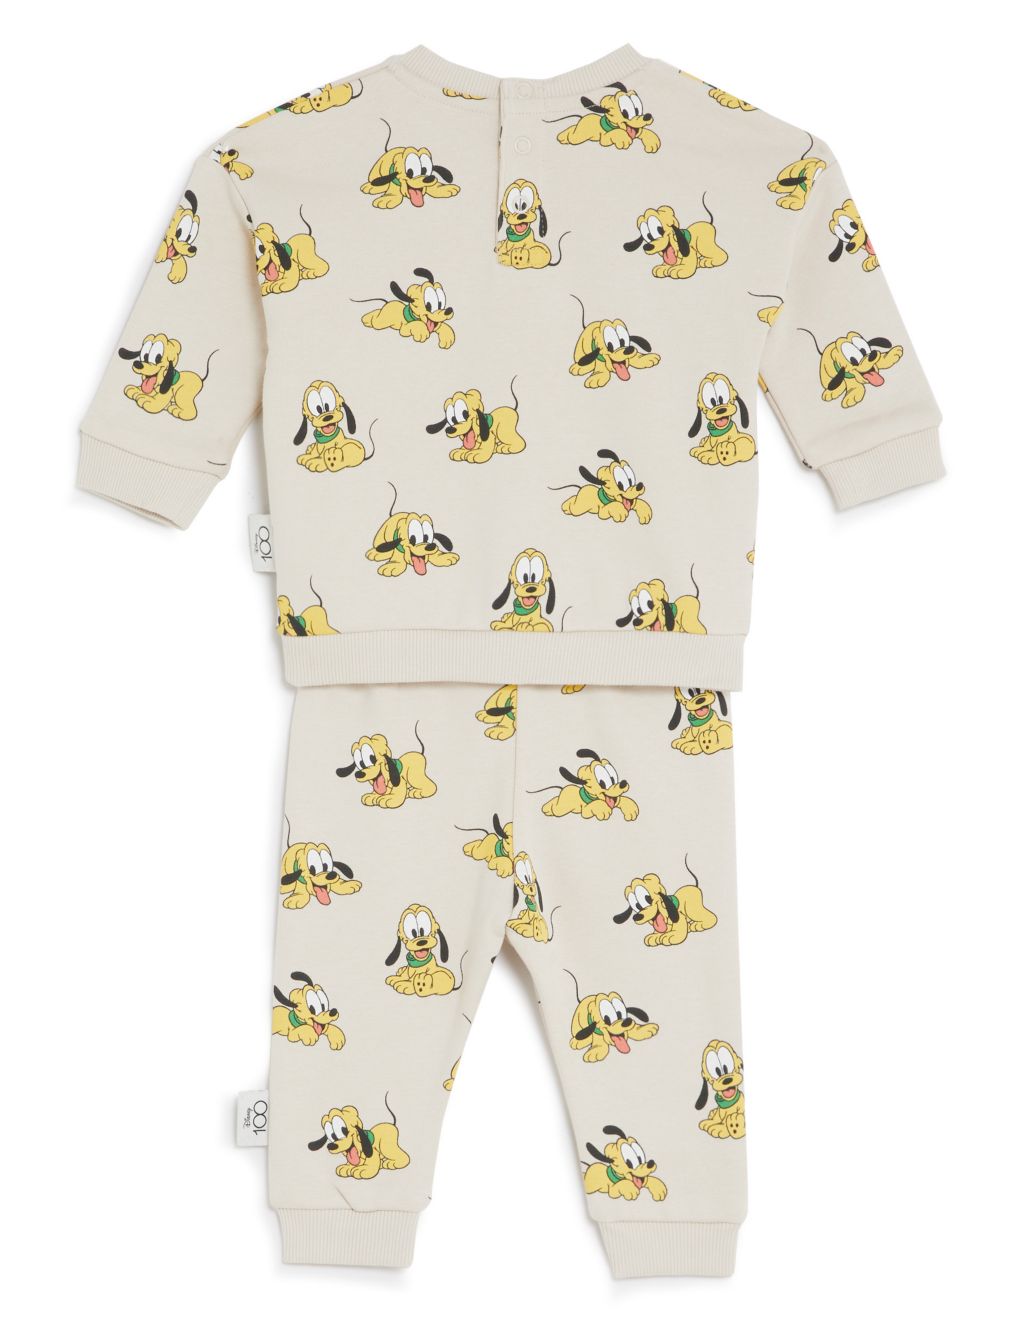 2pc Cotton Rich Pluto™ Outfit (0-3 Yrs) image 2